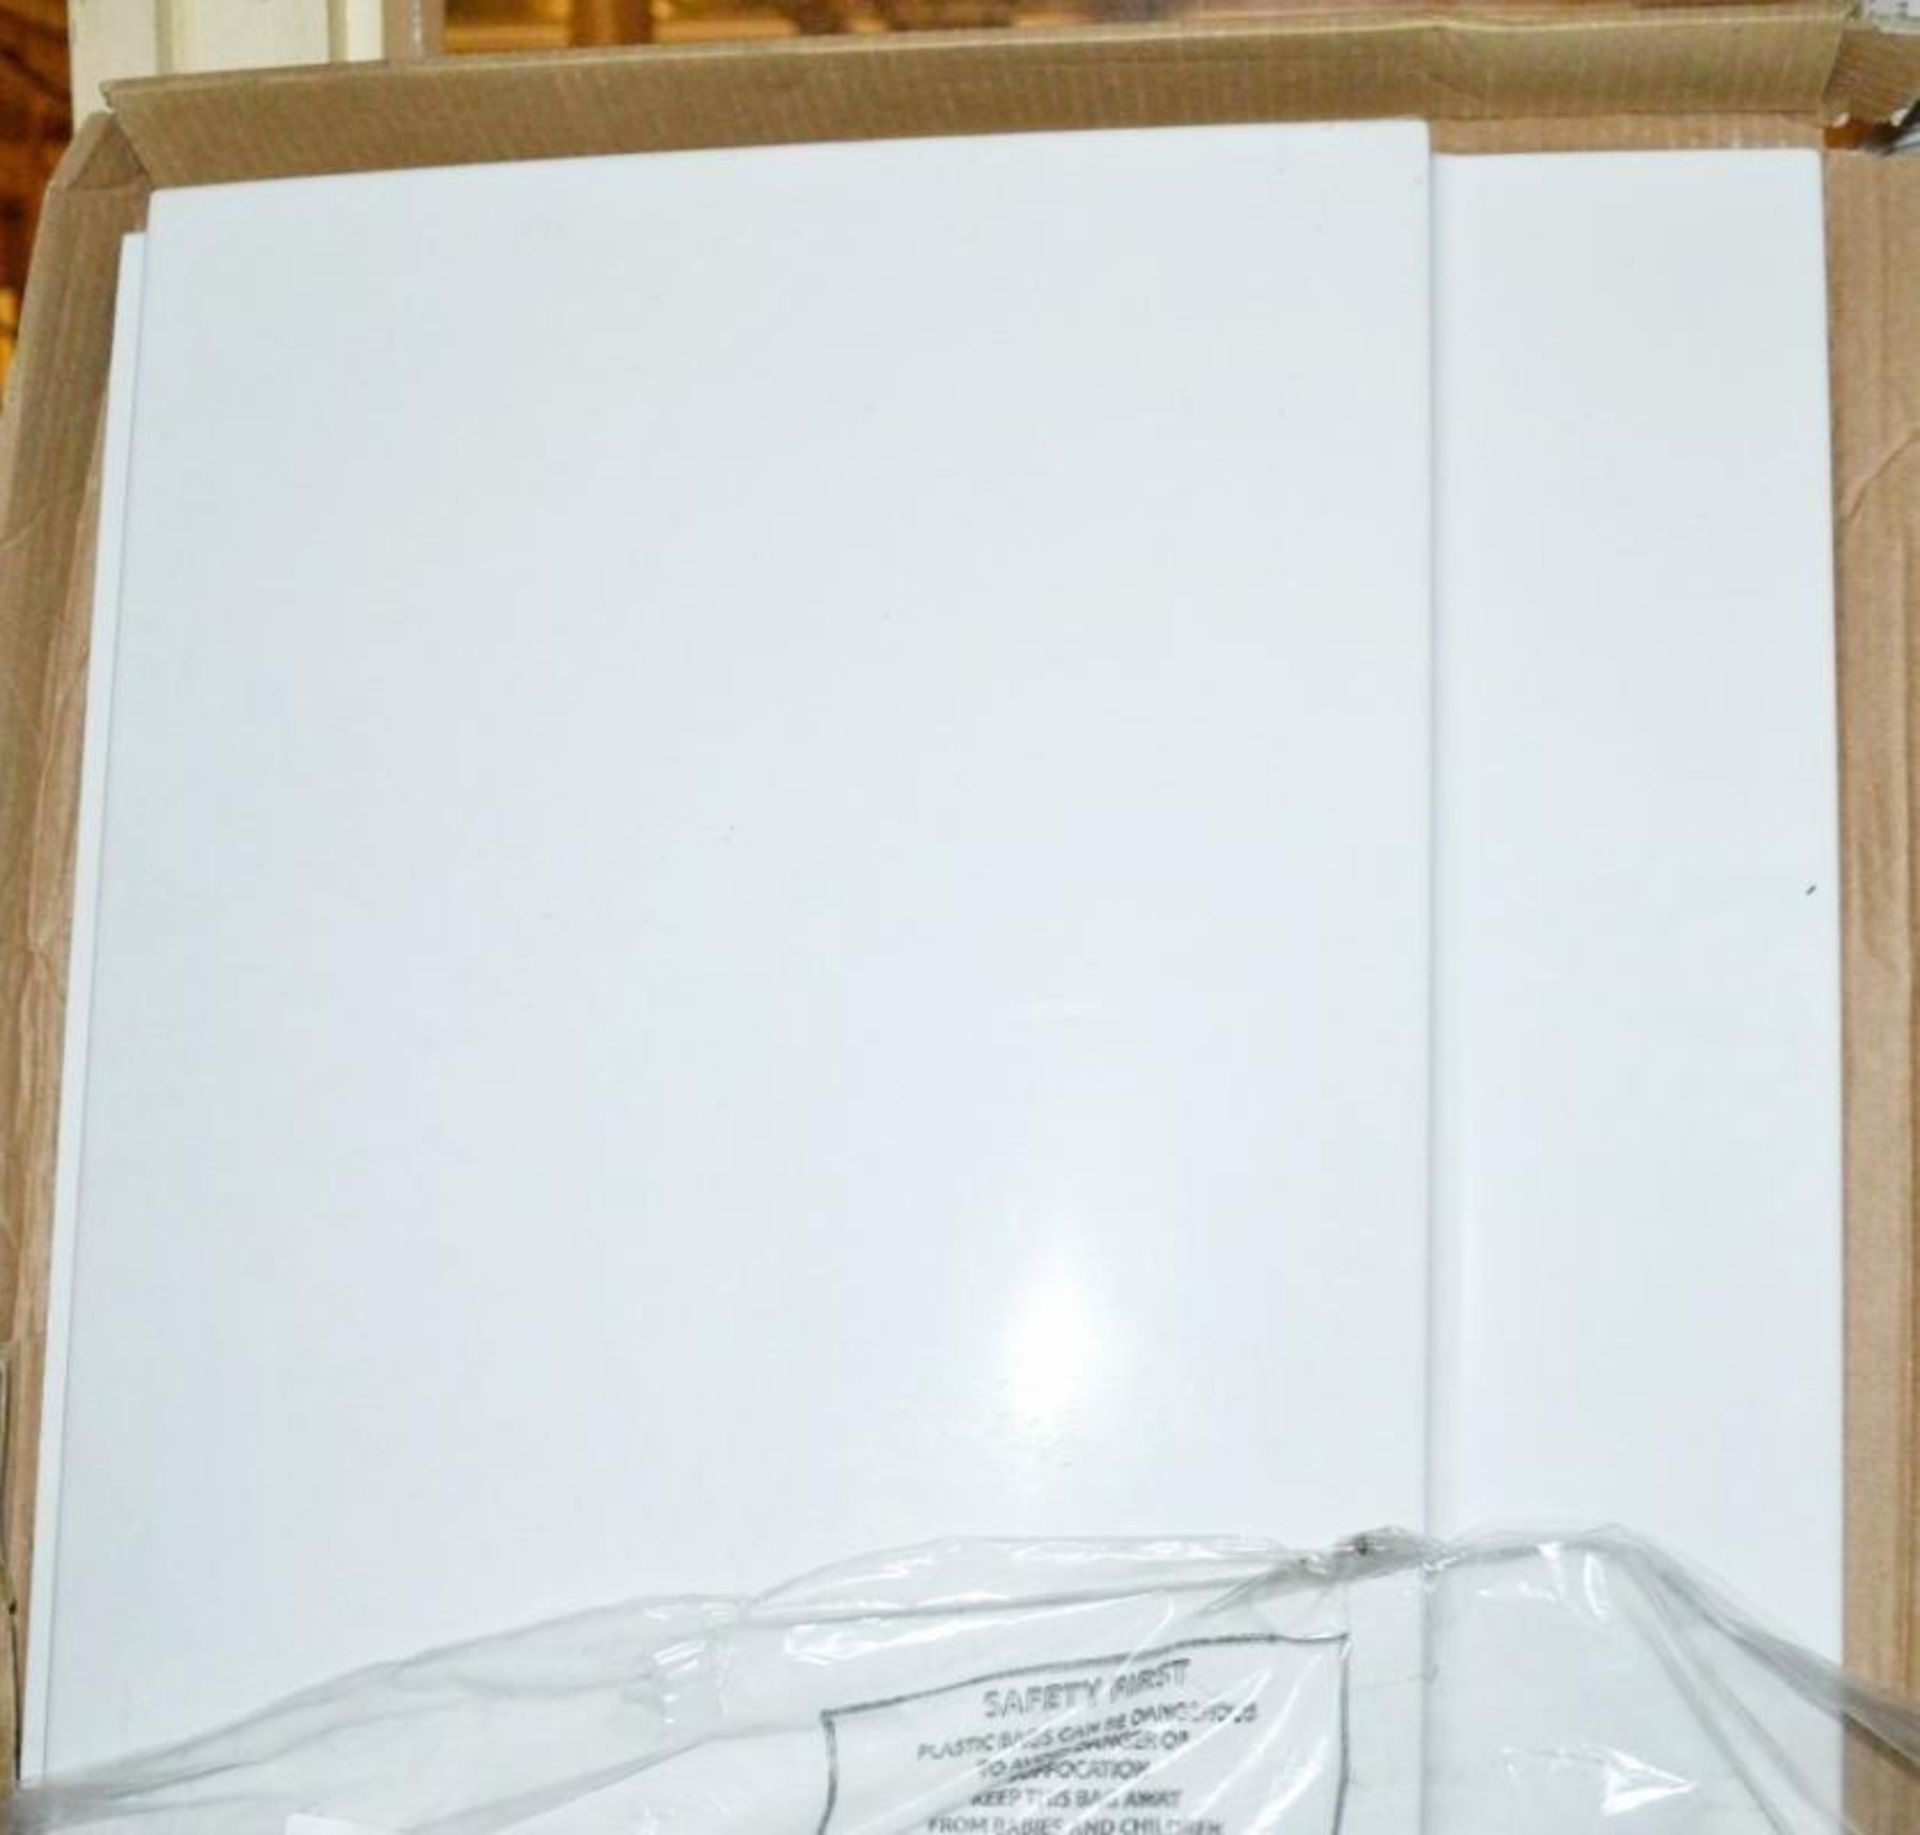 1 x 1700 Styrene Front Bath Panel (CPNL1700) - Dimensions: W1700 x 53 x 2mm - New / Unused Stock - R - Image 2 of 2